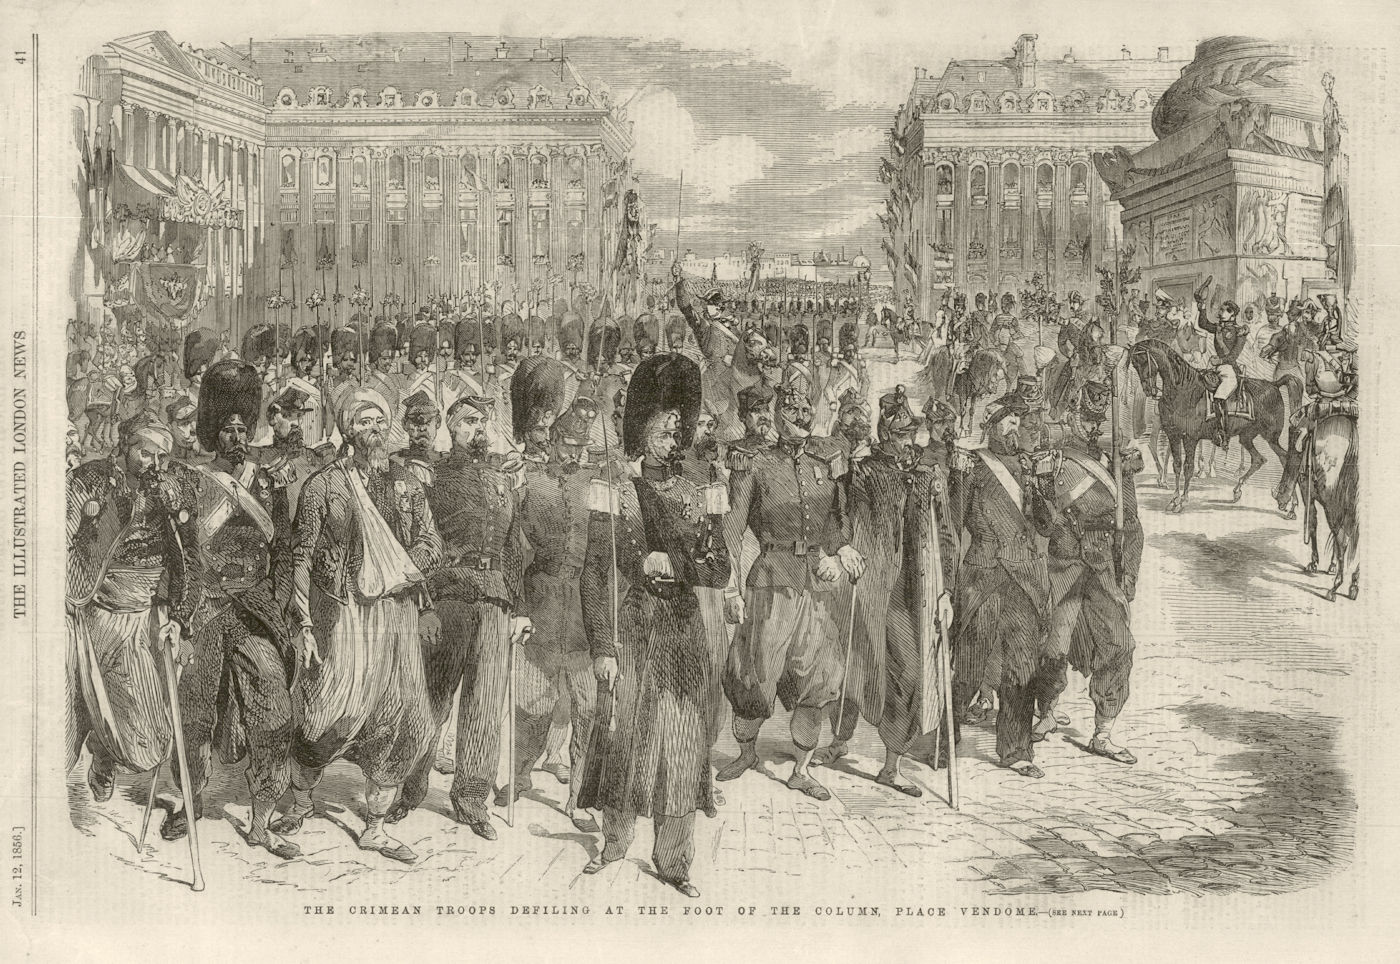 Associate Product The Crimean troops at the foot of the column, Place Vendome. Paris 1856 print